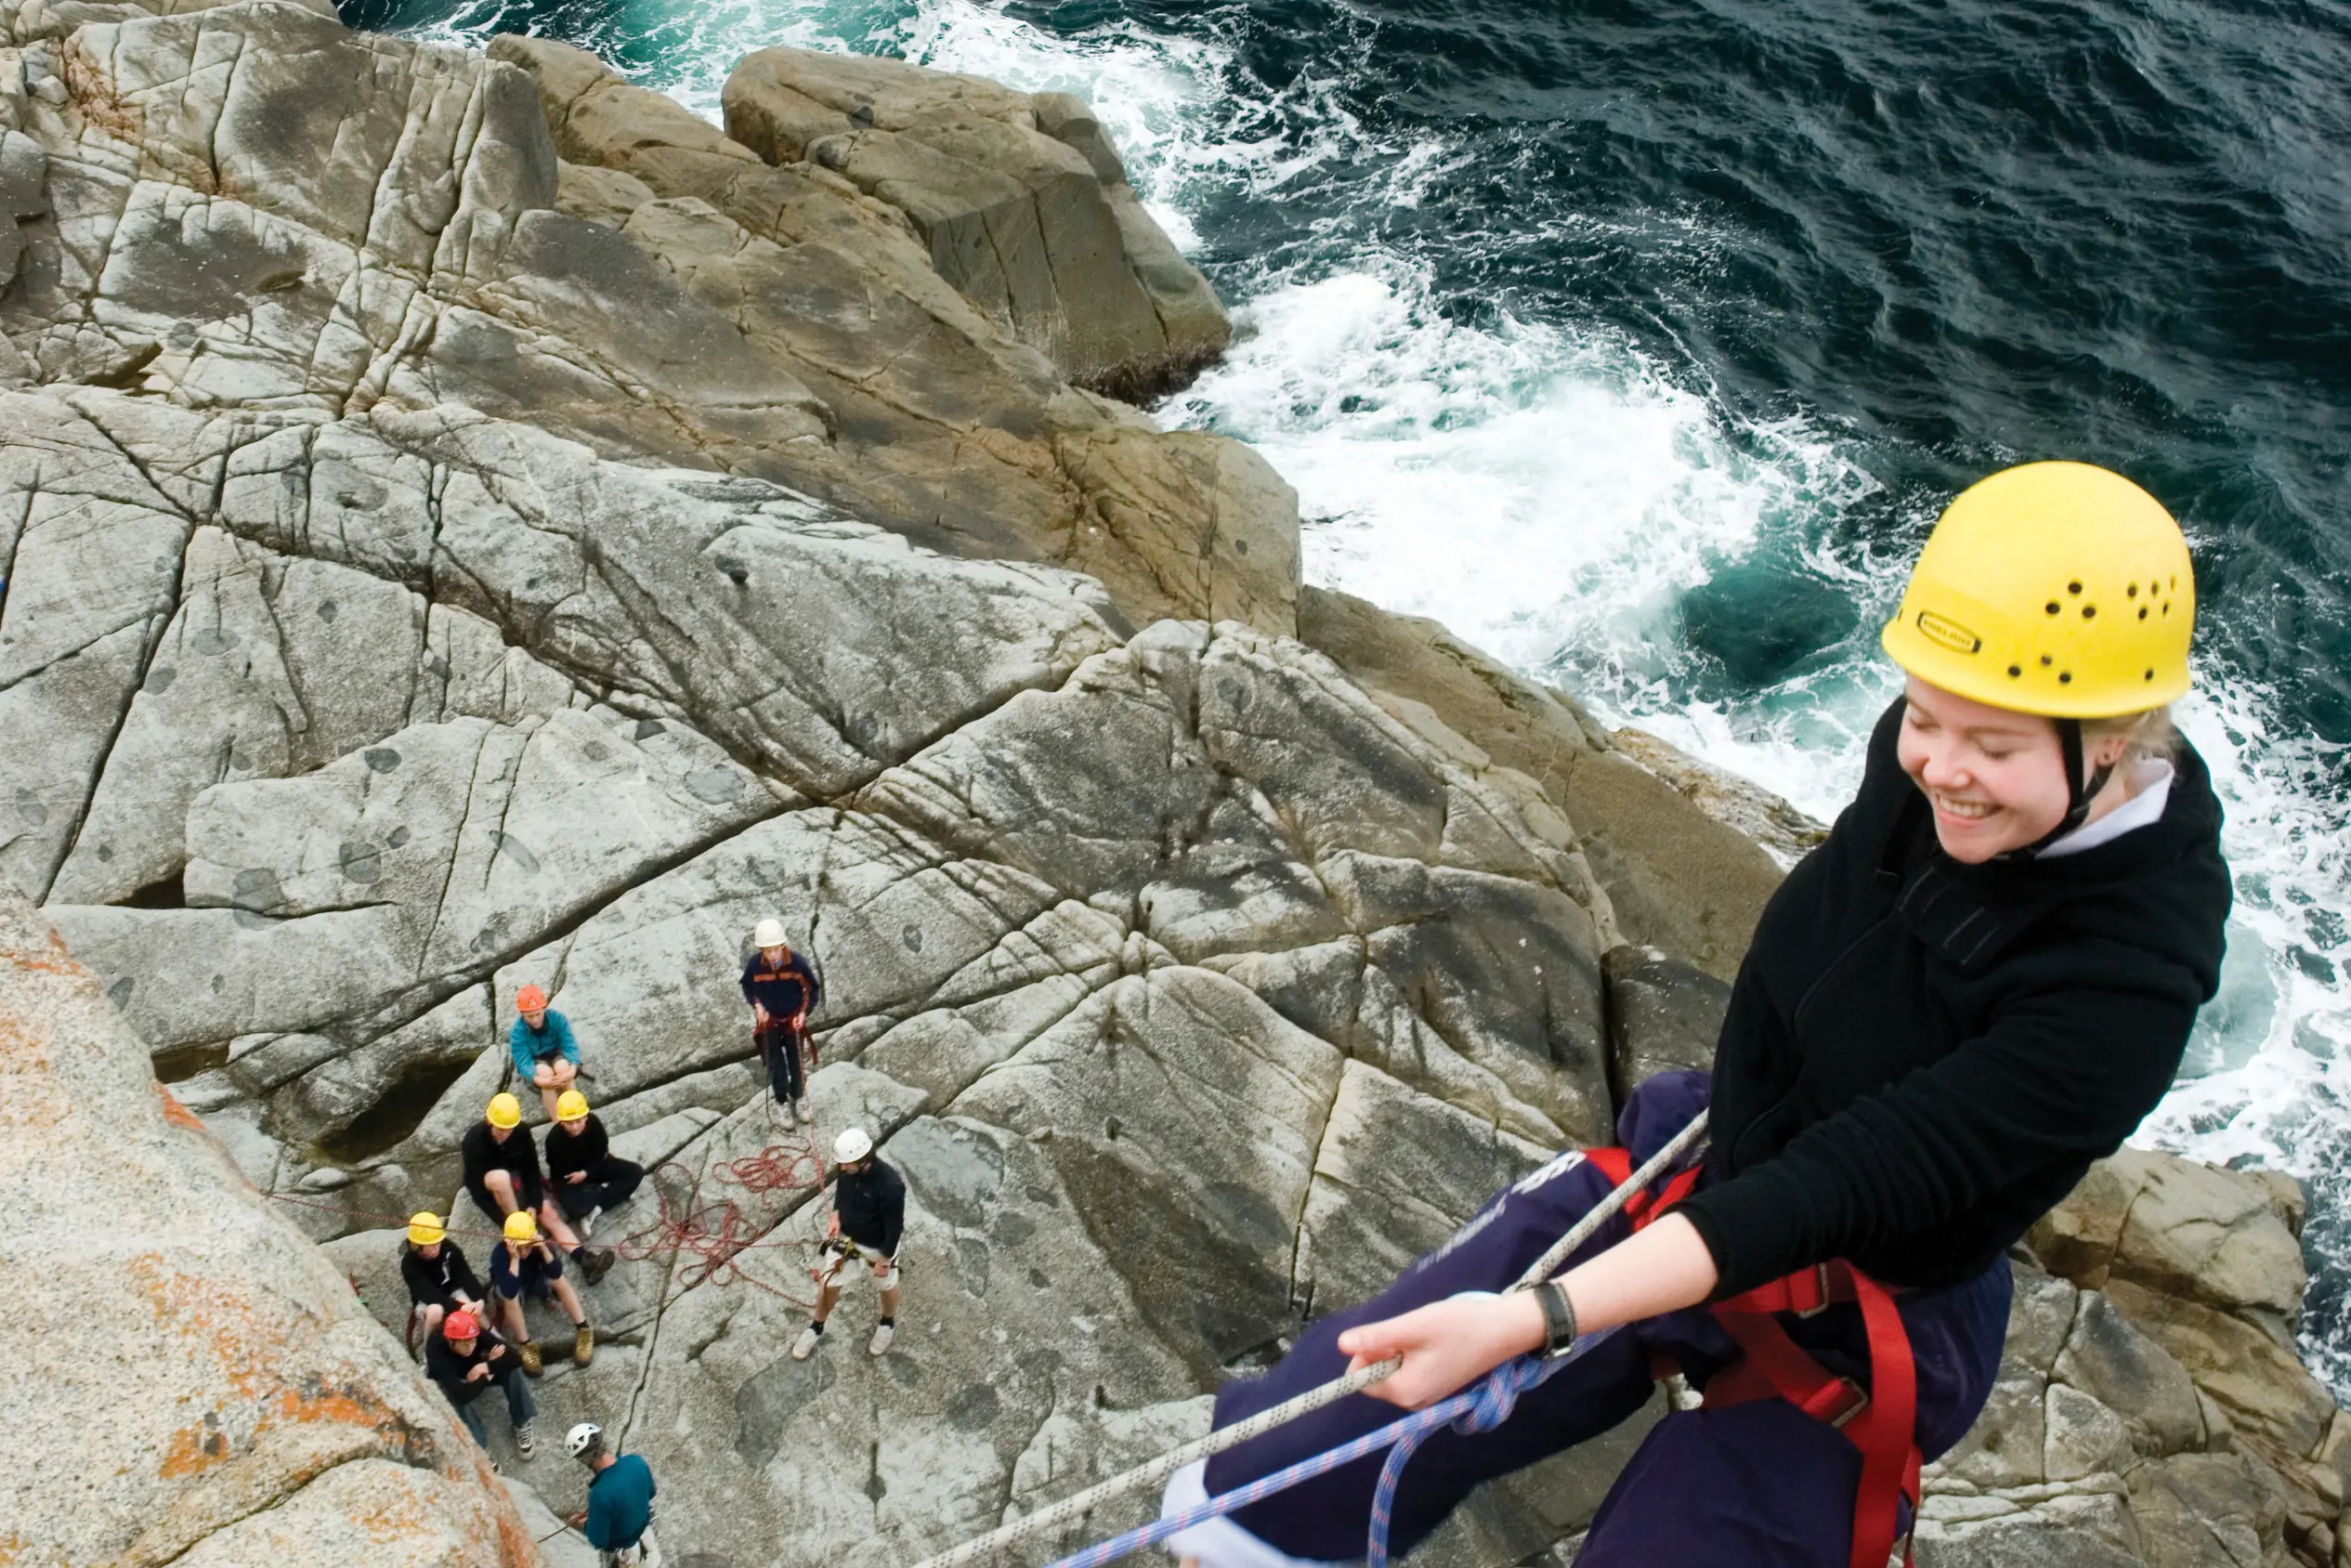 A woman wearing safety equipment and a harness abseils down a rocky cliff near the ocean. A group watch from below.